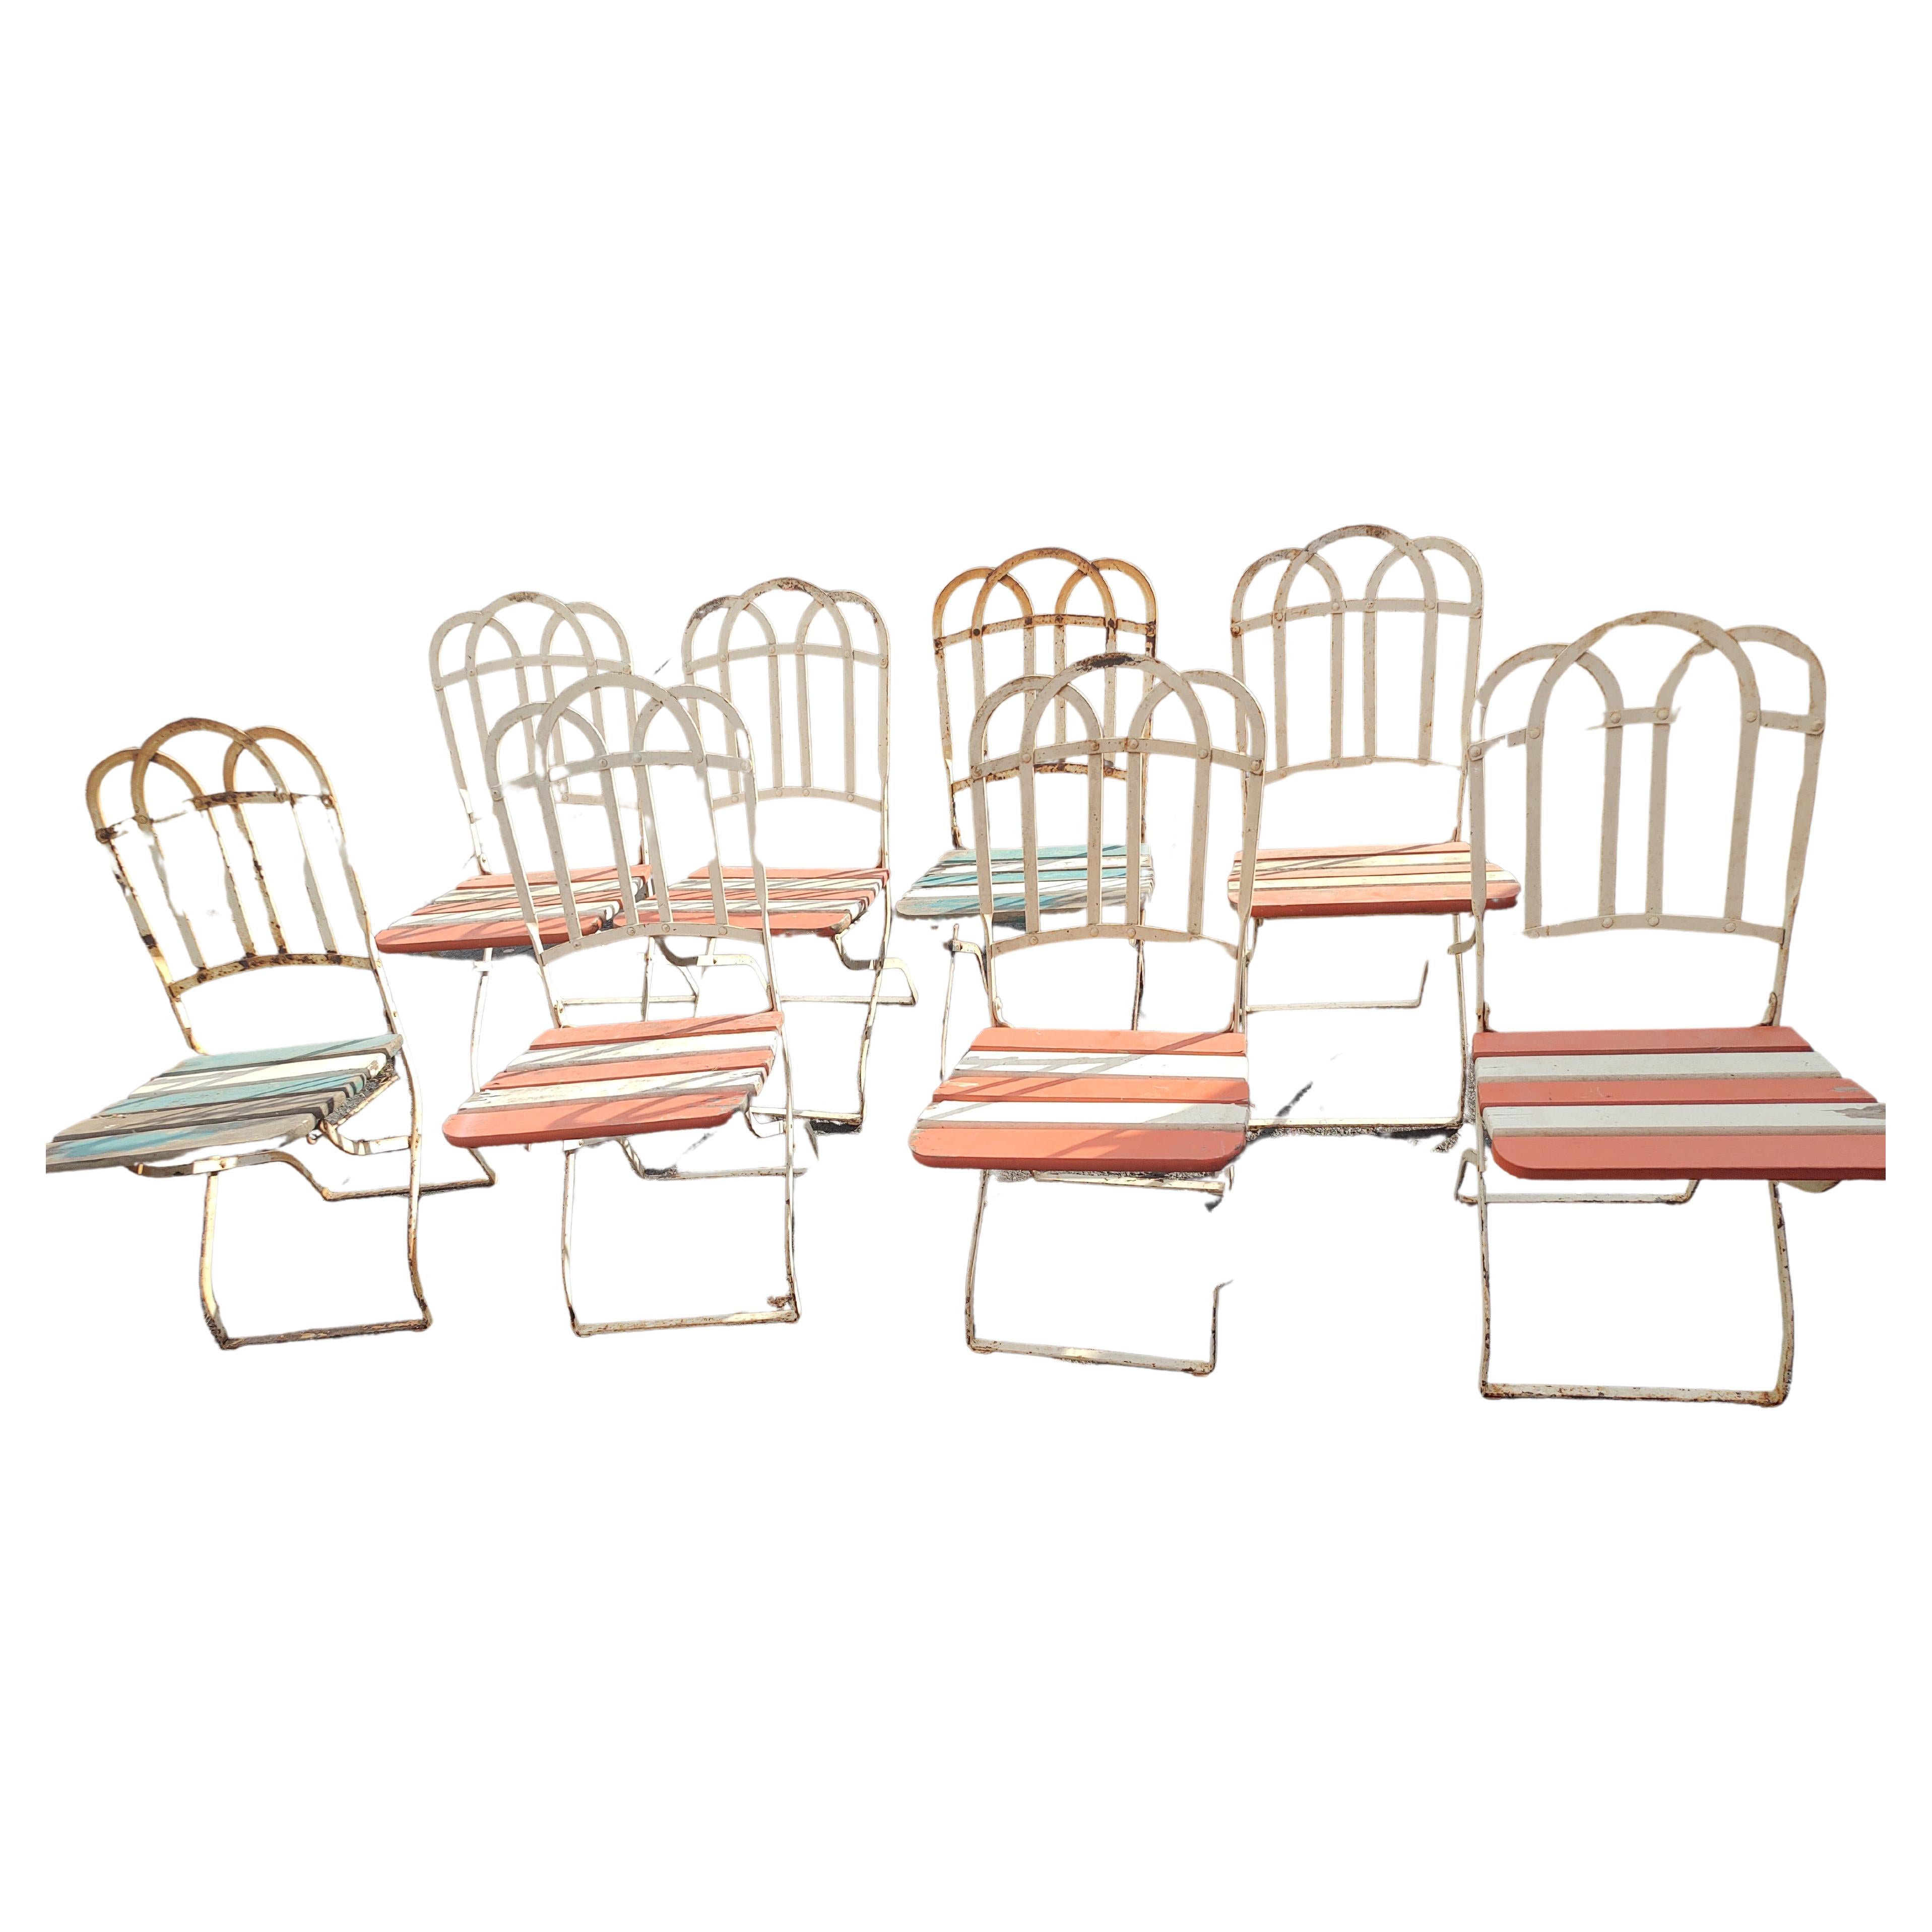 Fabulous set of 8 fold up garden dining area chairs with a bit of that Parisian charm and elegance associated with French Cafes. Chairs are in excellent antique unrestored condition. Wood is totally intact and the fold up mechanisms work great. Old